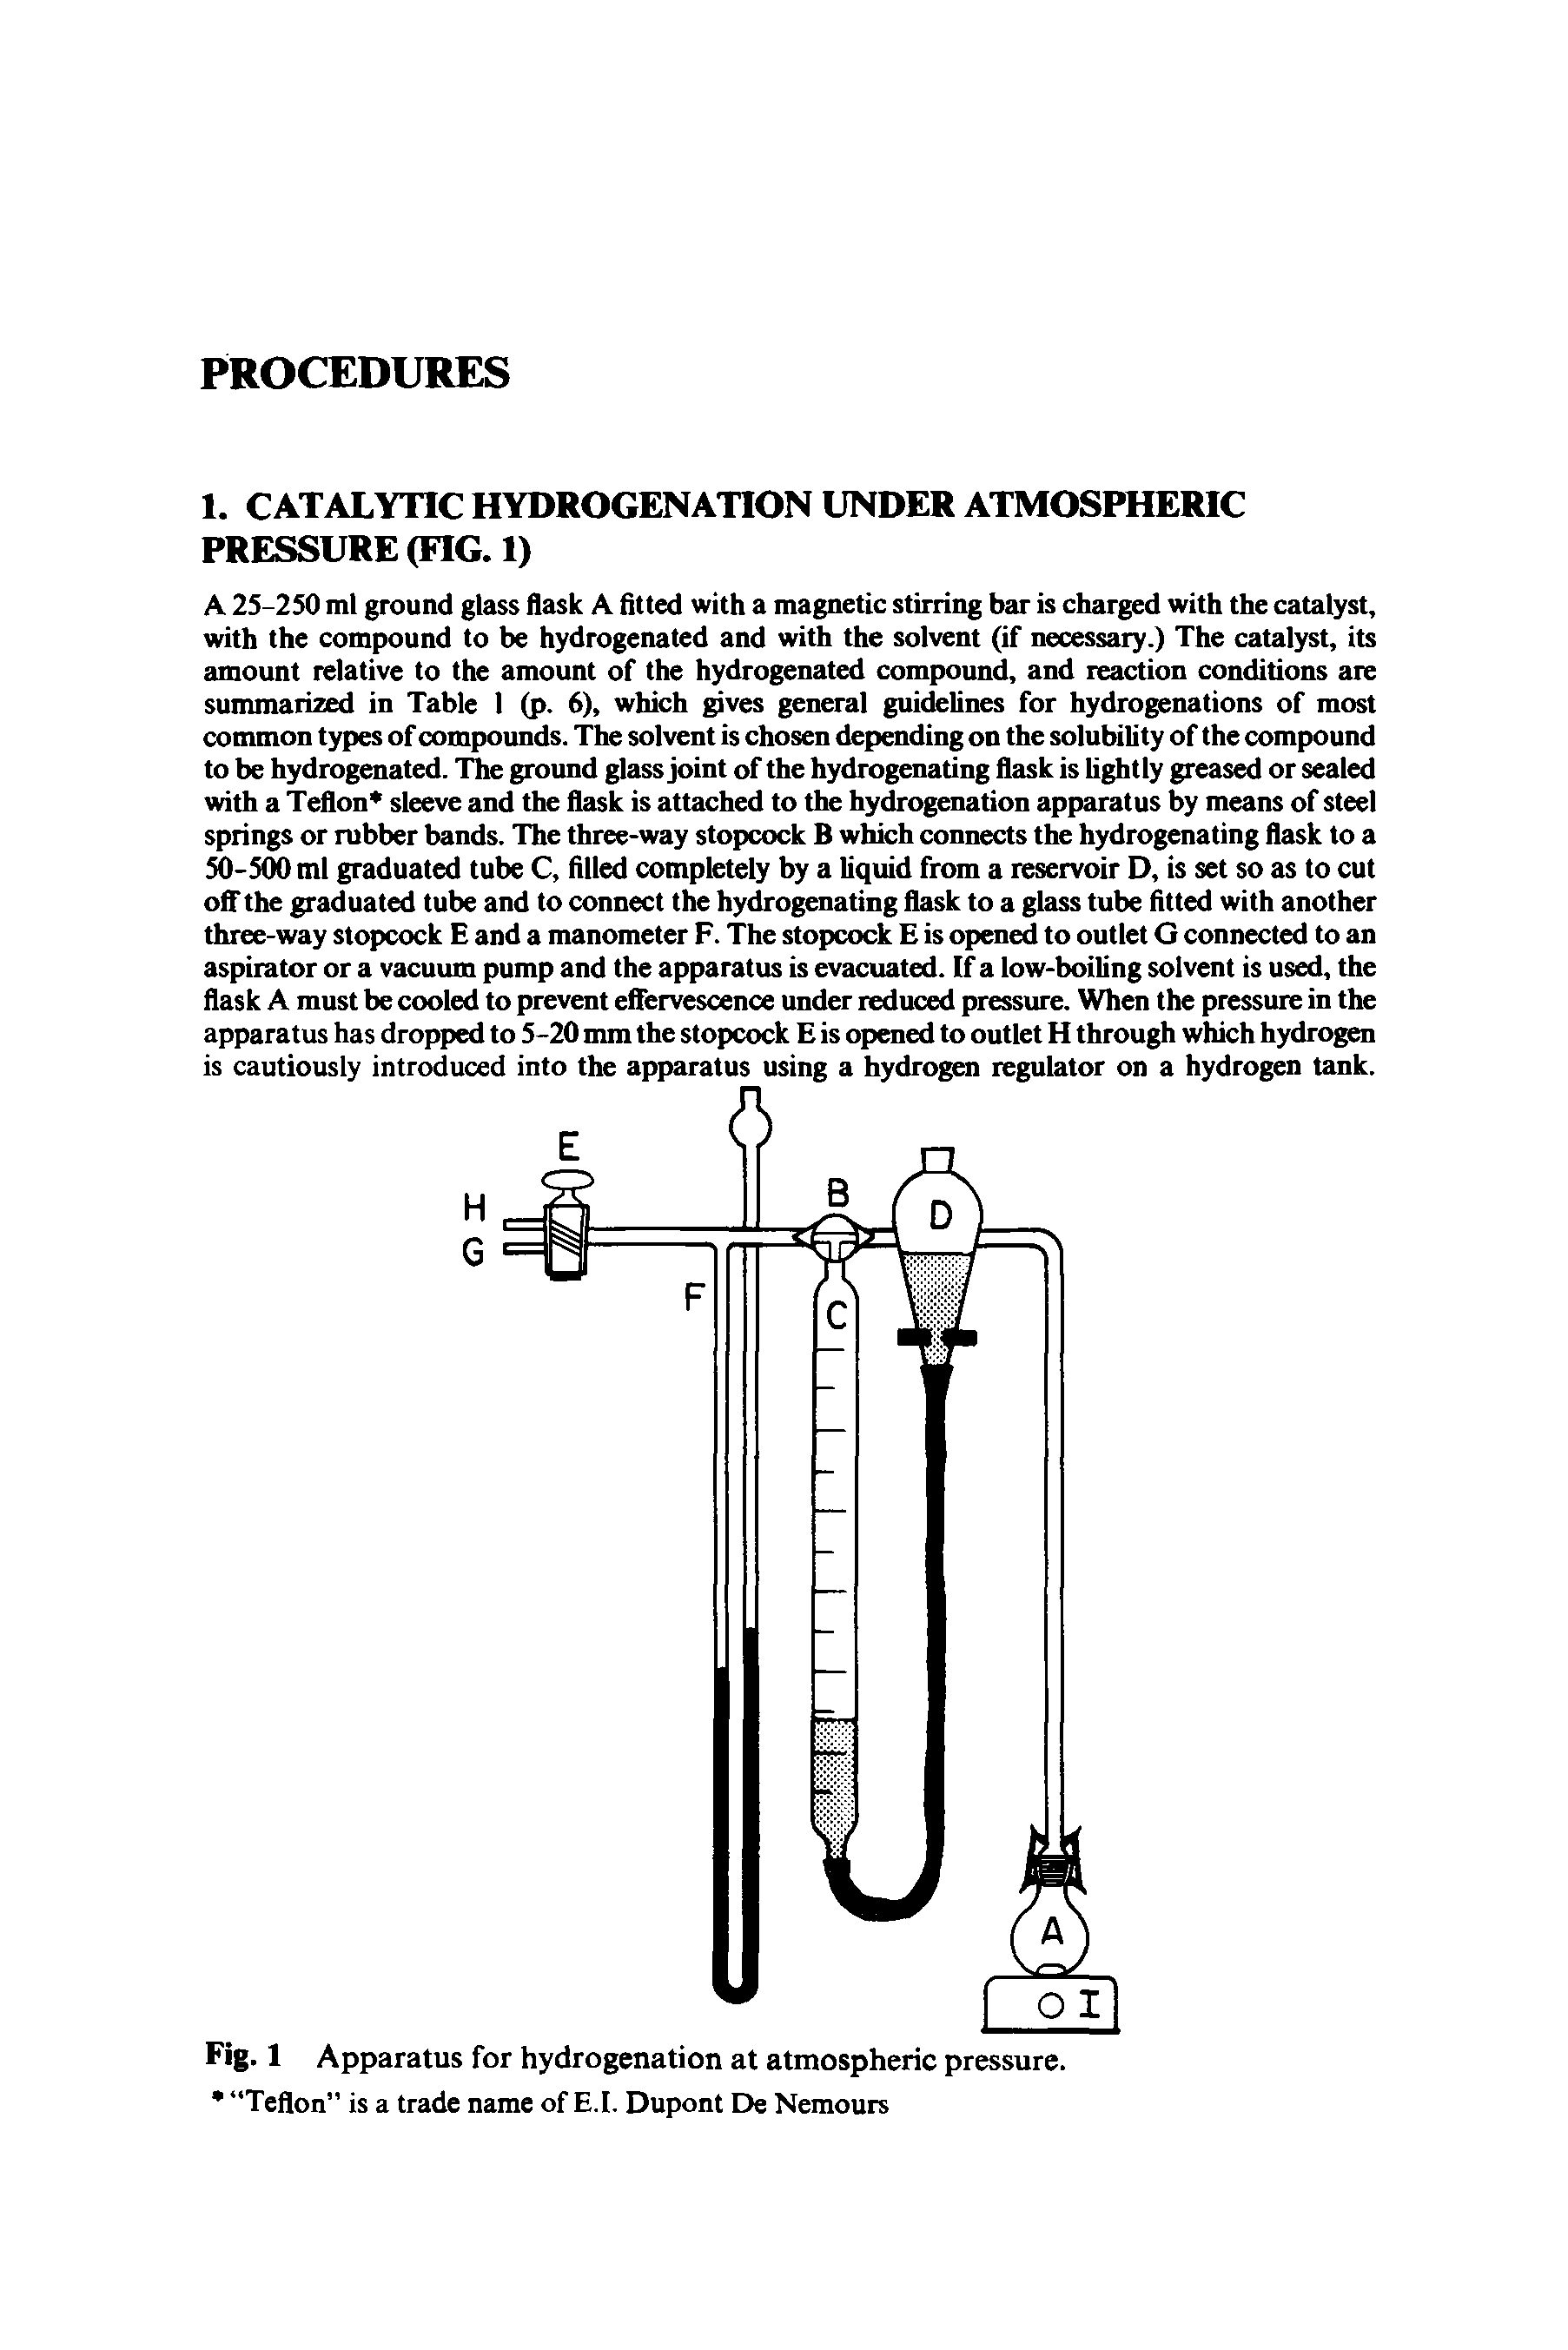 Fig. 1 Apparatus for hydrogenation at atmospheric pressure. Teflon is a trade name of E.l. Dupont De Nemours...